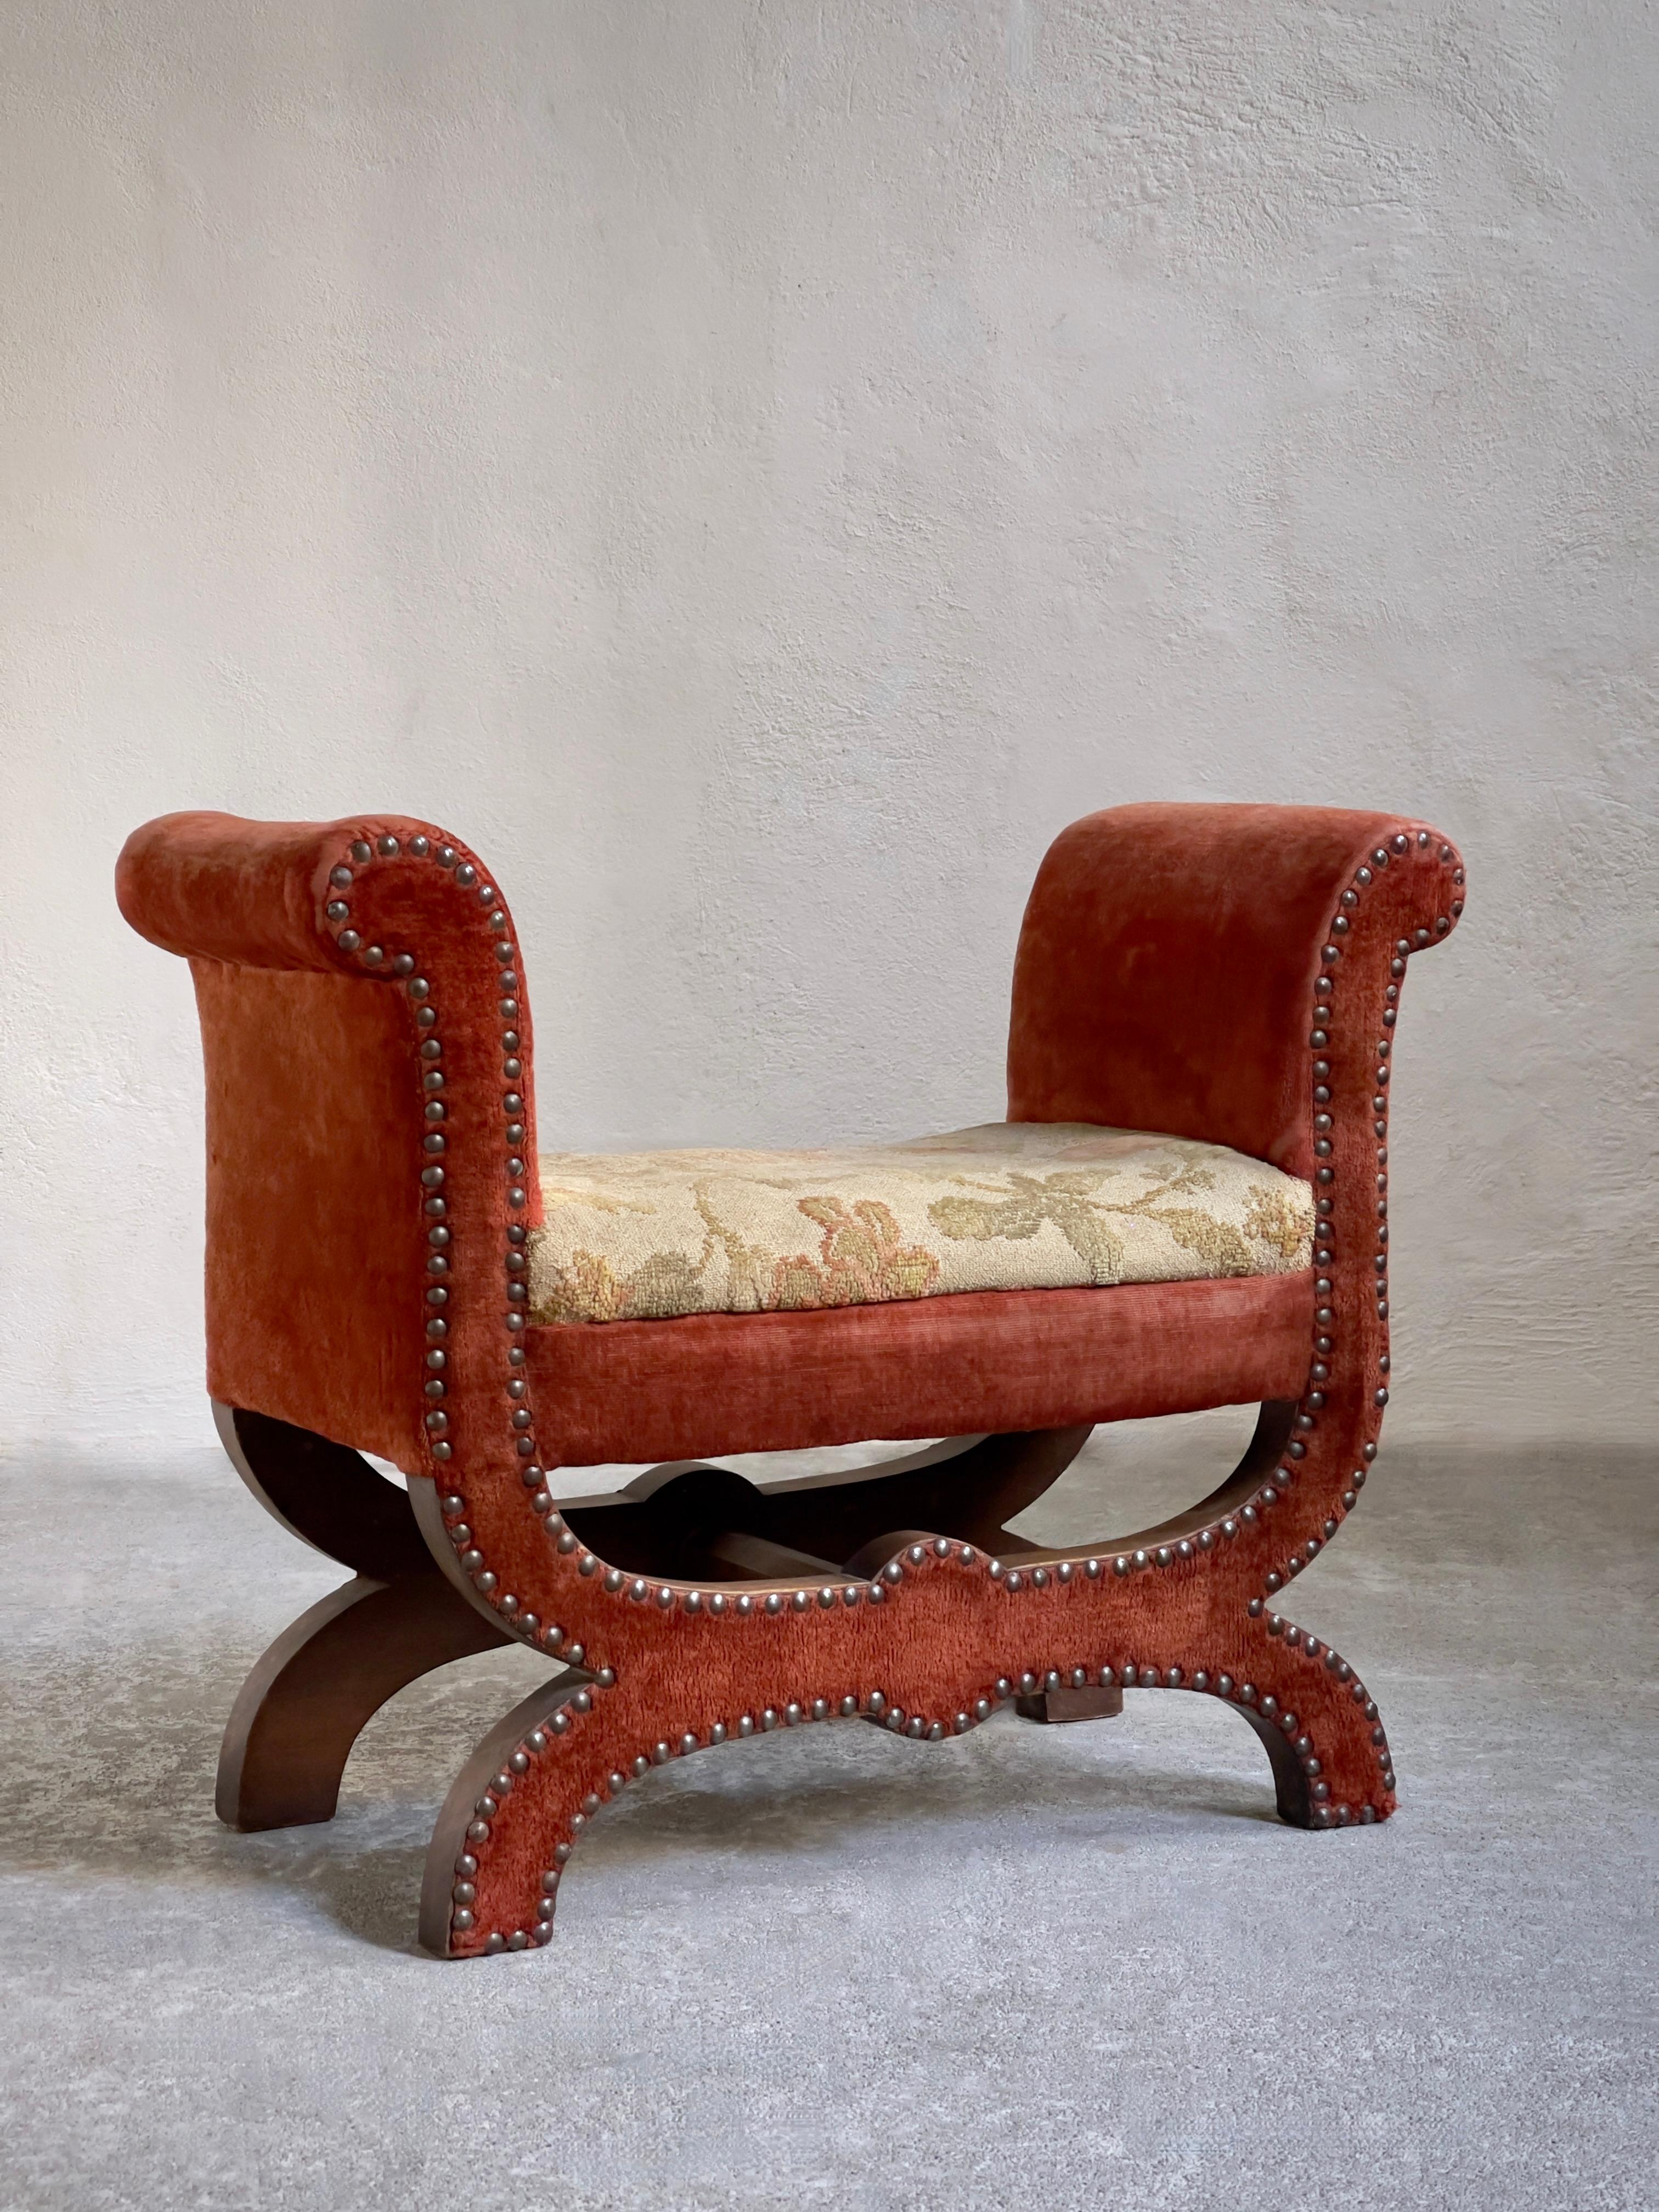 Original Otto Schultz stool with nailheads and fabric for Boet 1930s, Sweden. For Sale